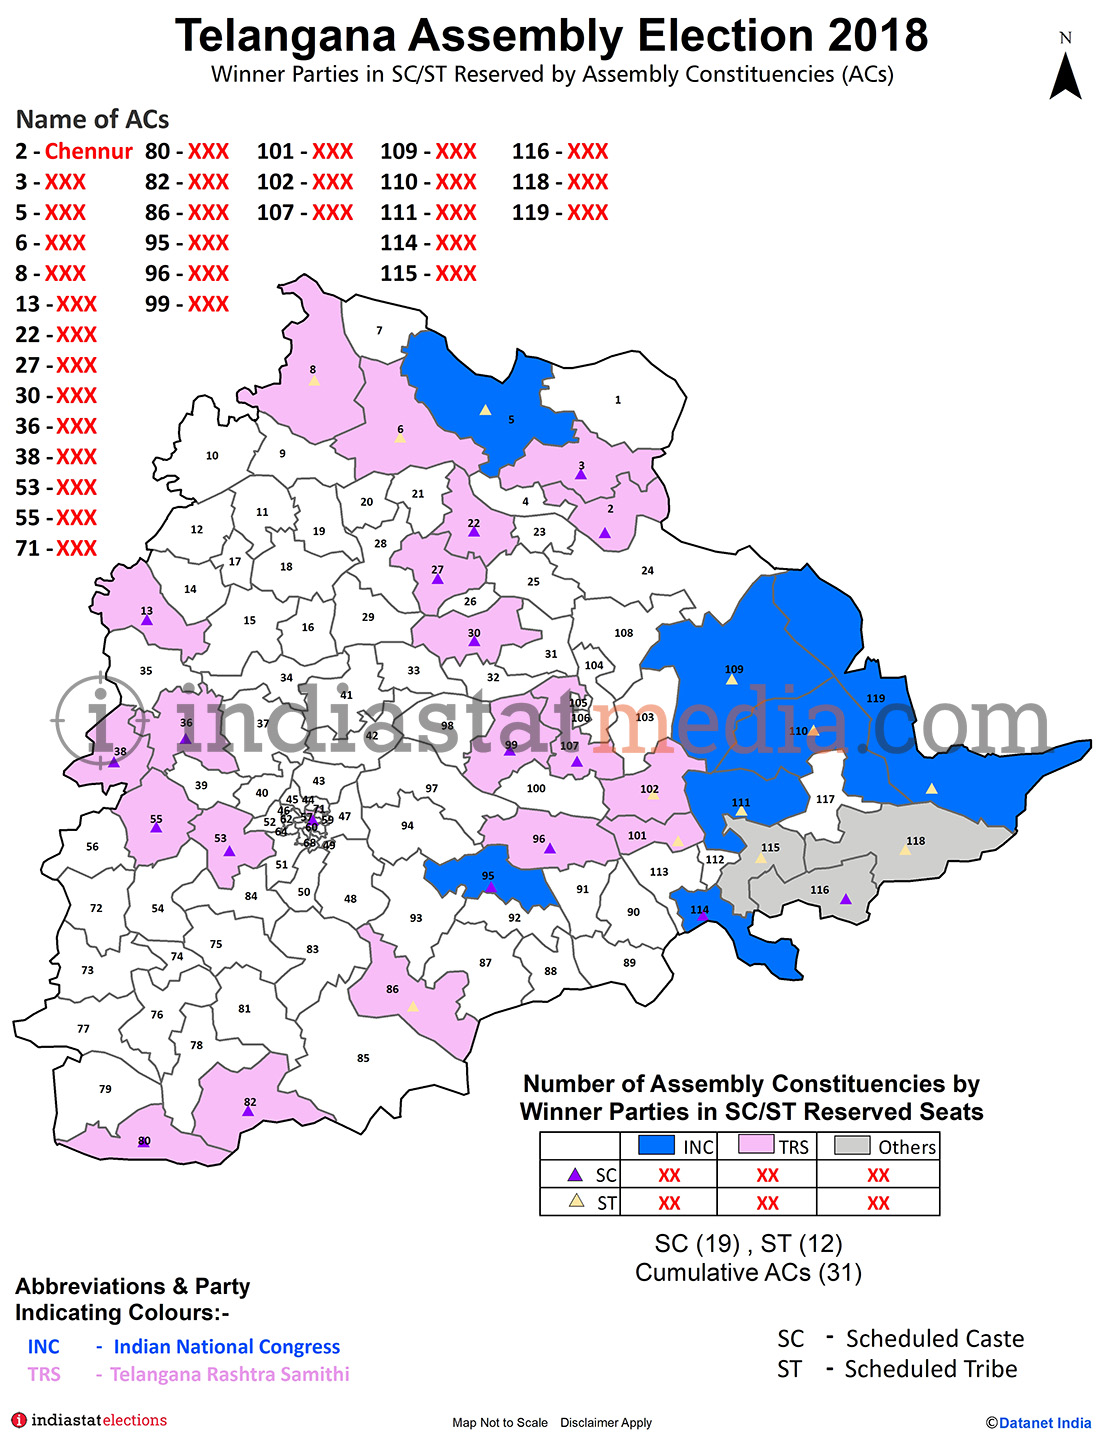 Winner Parties in Scheduled Caste (SC)/Scheduled Tribe (ST) Reserved Constituencies in Telangana Assembly Election (2018)